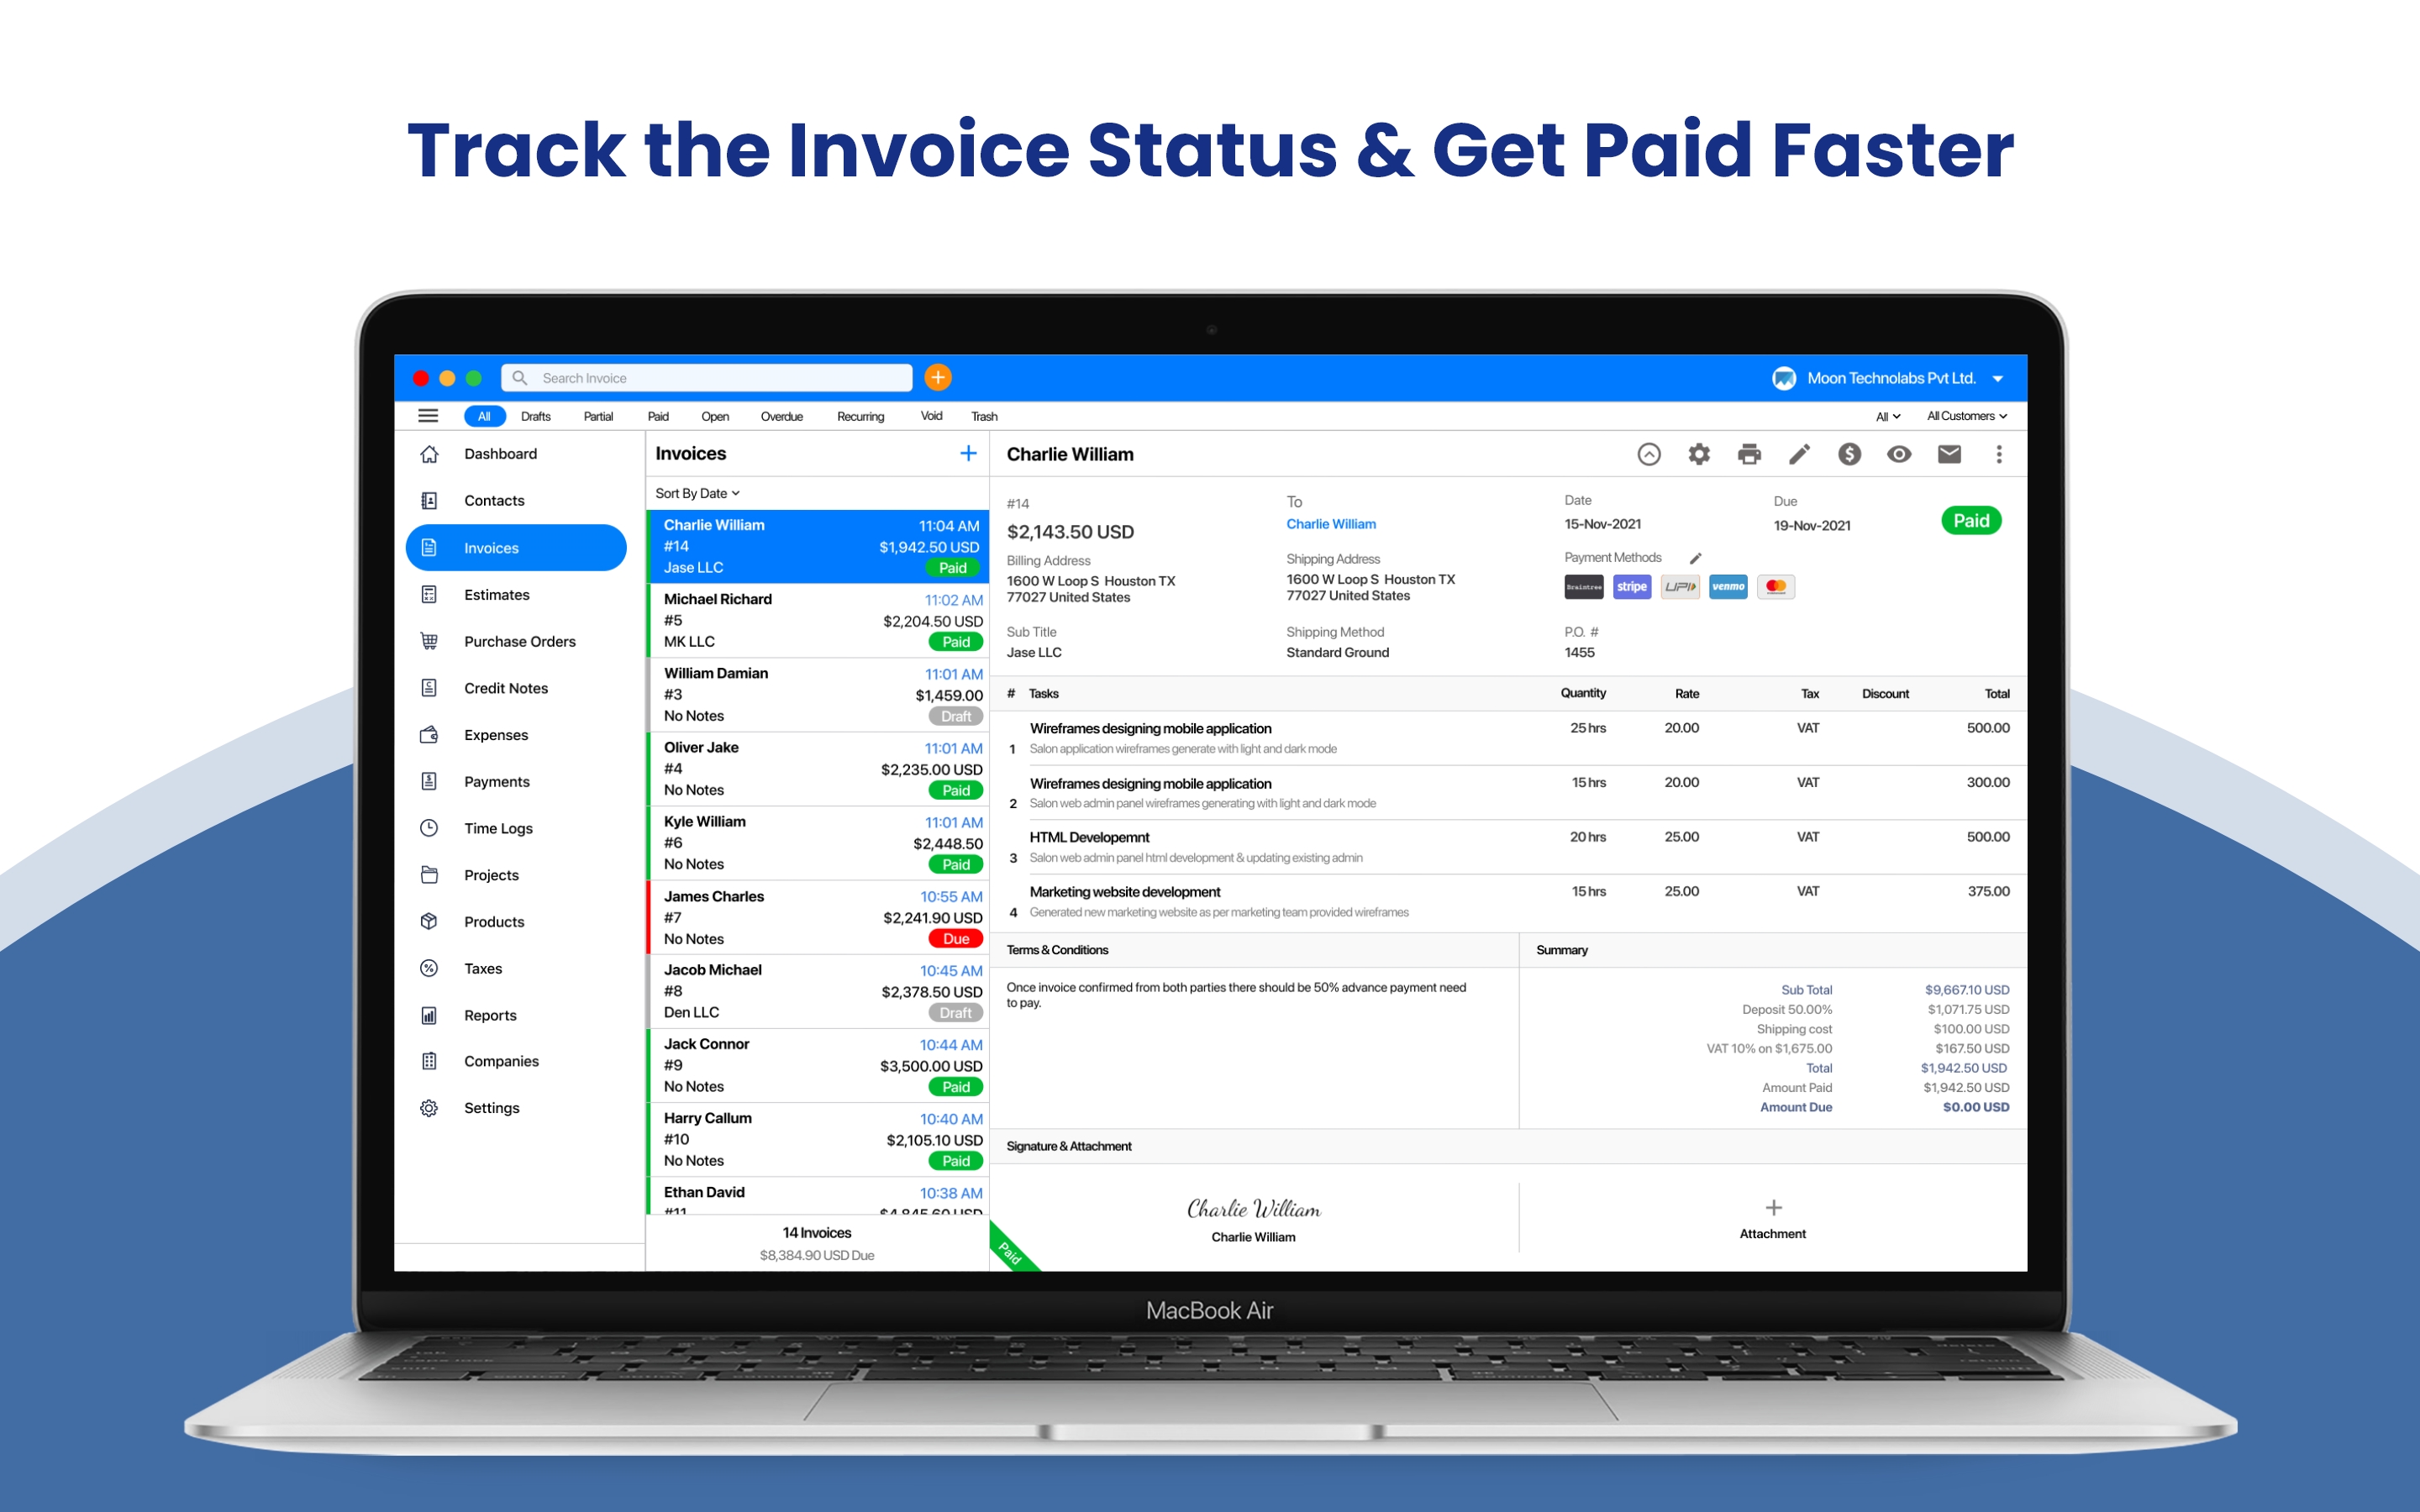 Track the Invoice Status & Get Paid Faster